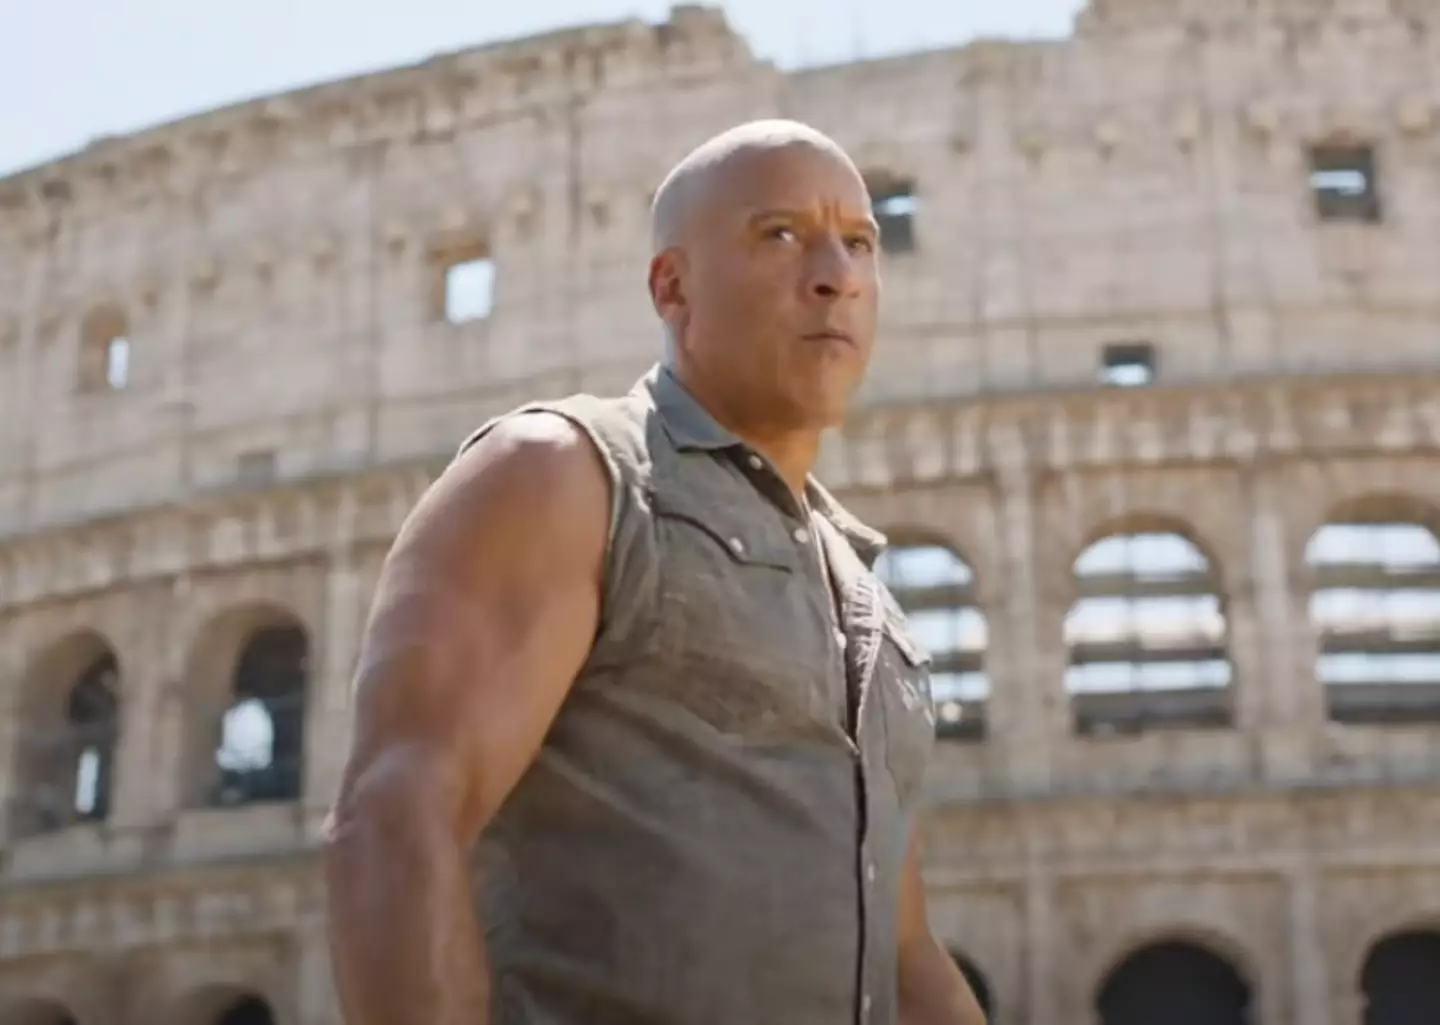 Vin Diesel is back alongside some familiar - and not so familiar - faces.